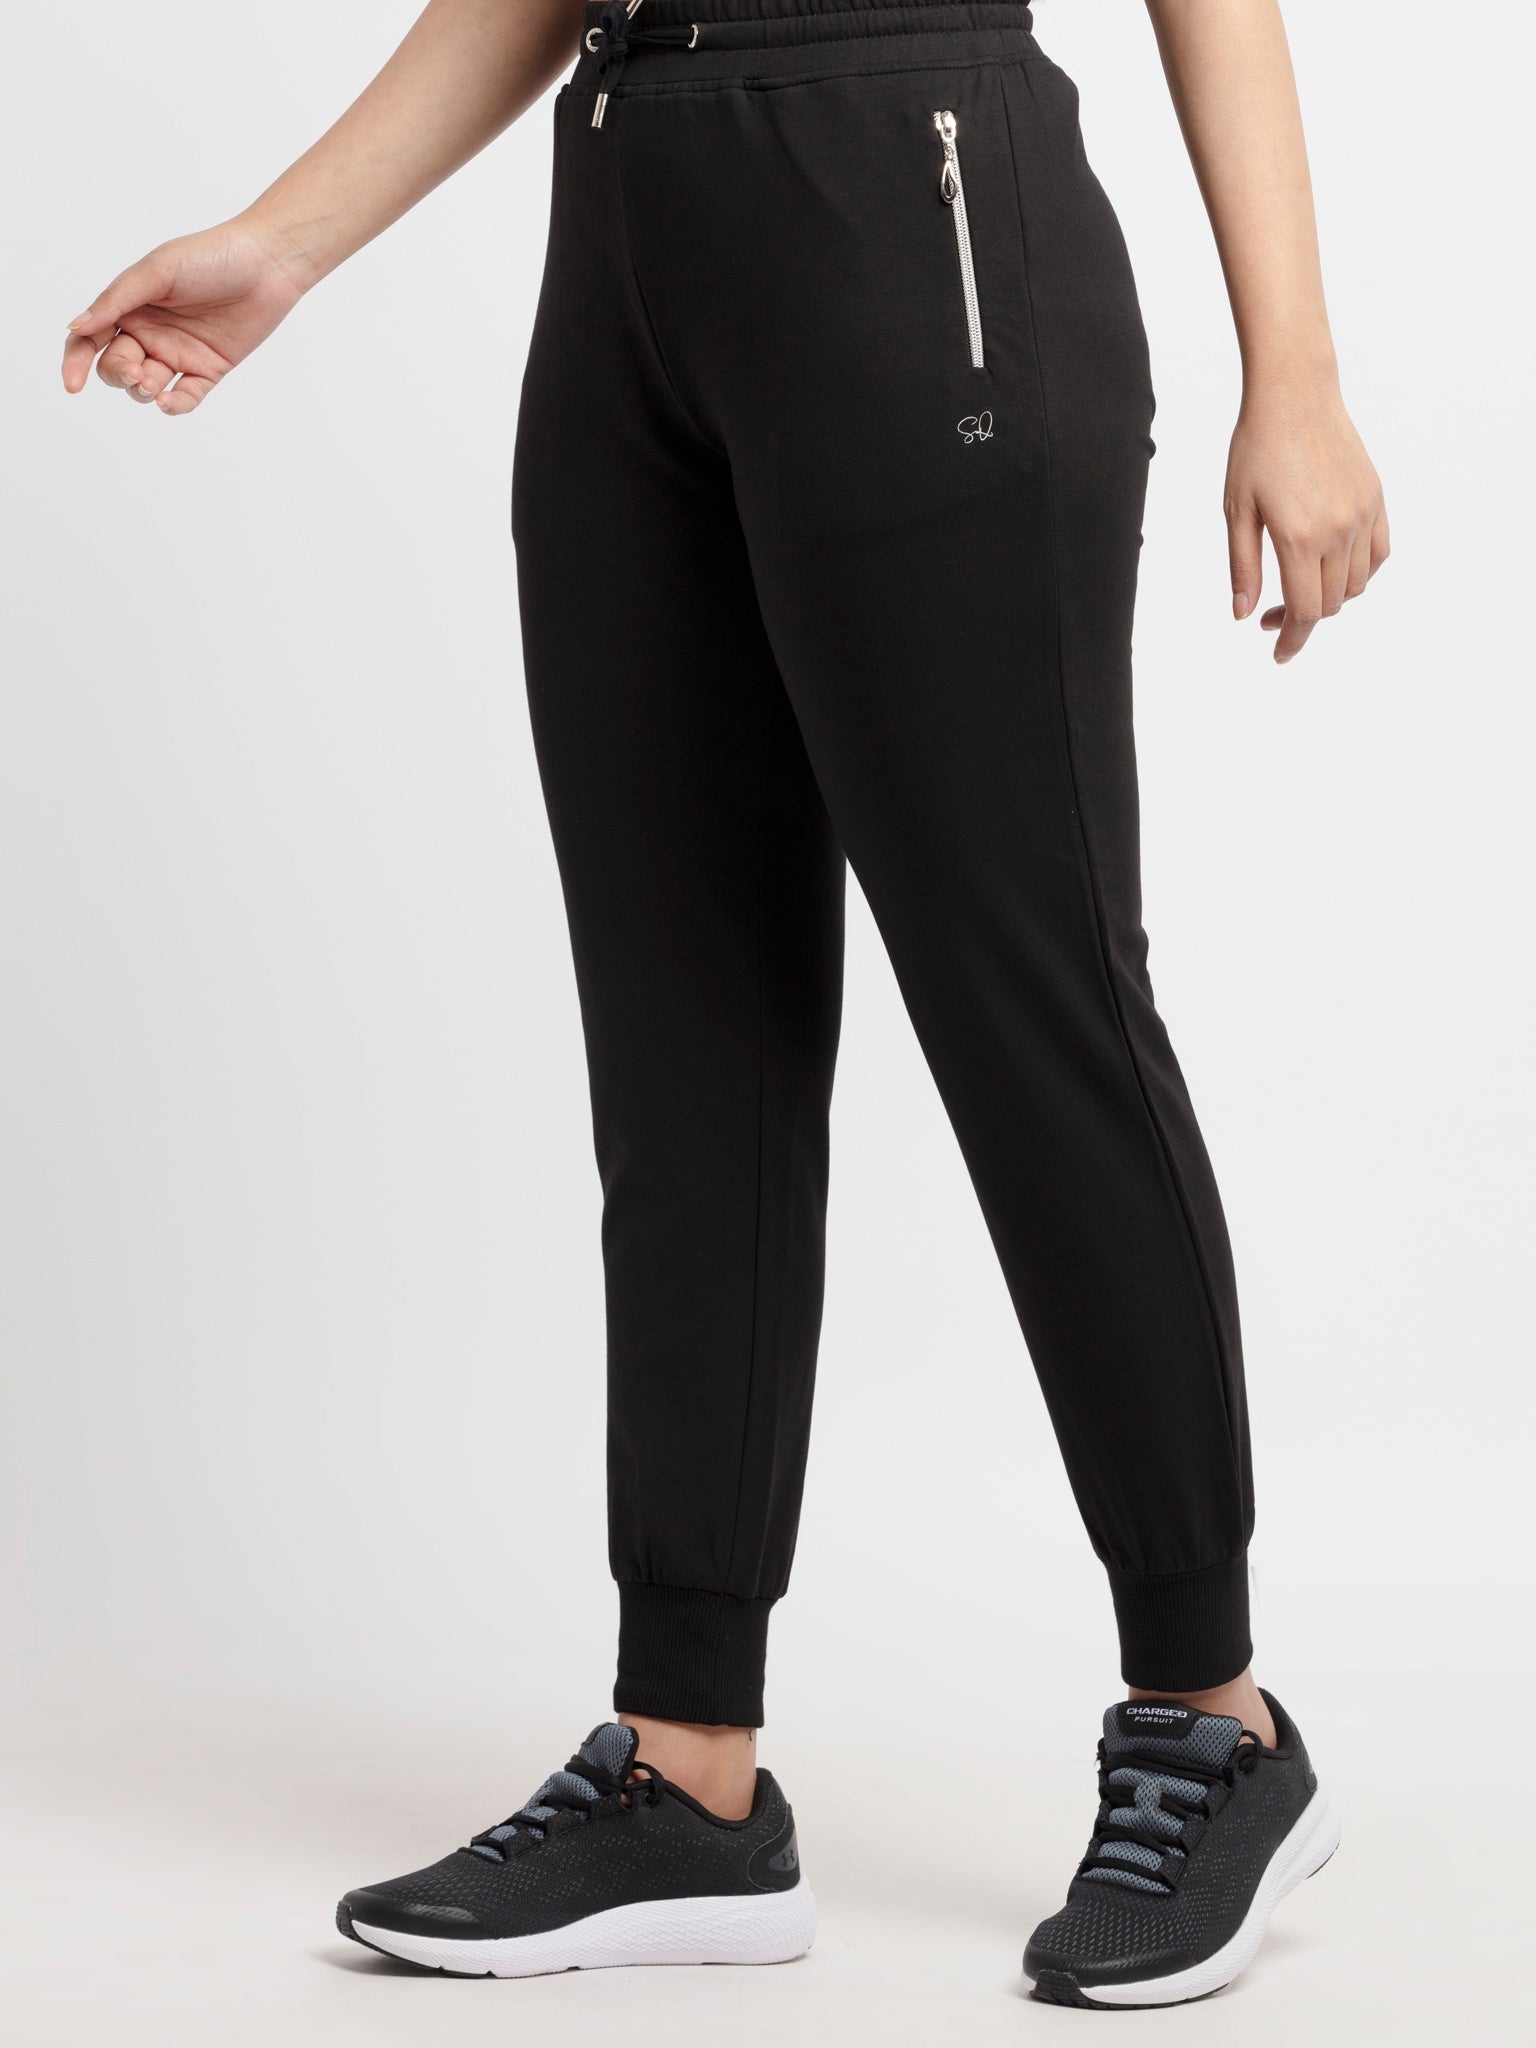 Status Quo | Women'ss Full length Solid Joggers 1